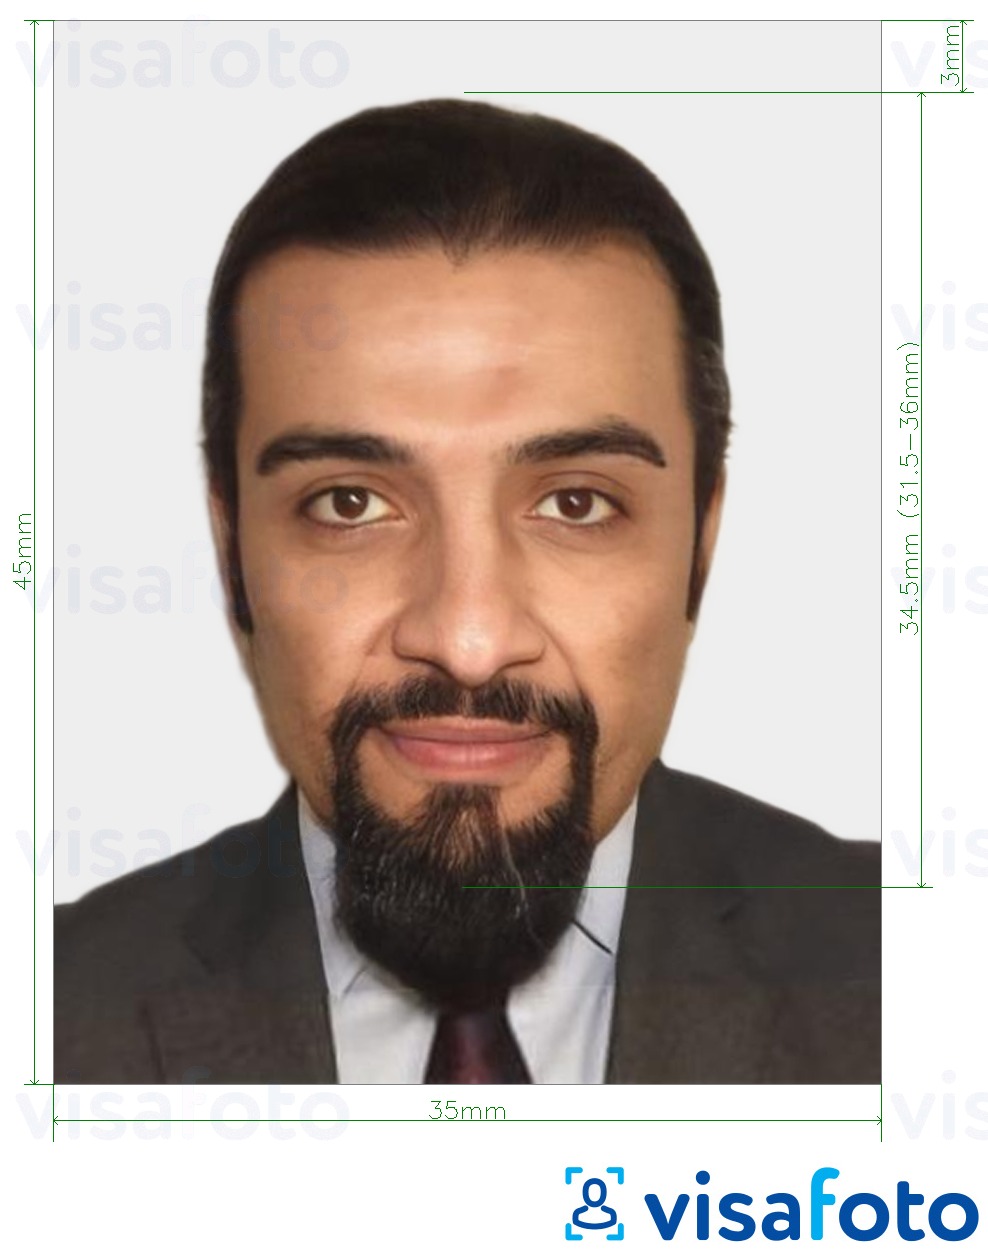 Example of photo for Mauritania passport 35x45 mm (3.5x4.5 cm) with exact size specification